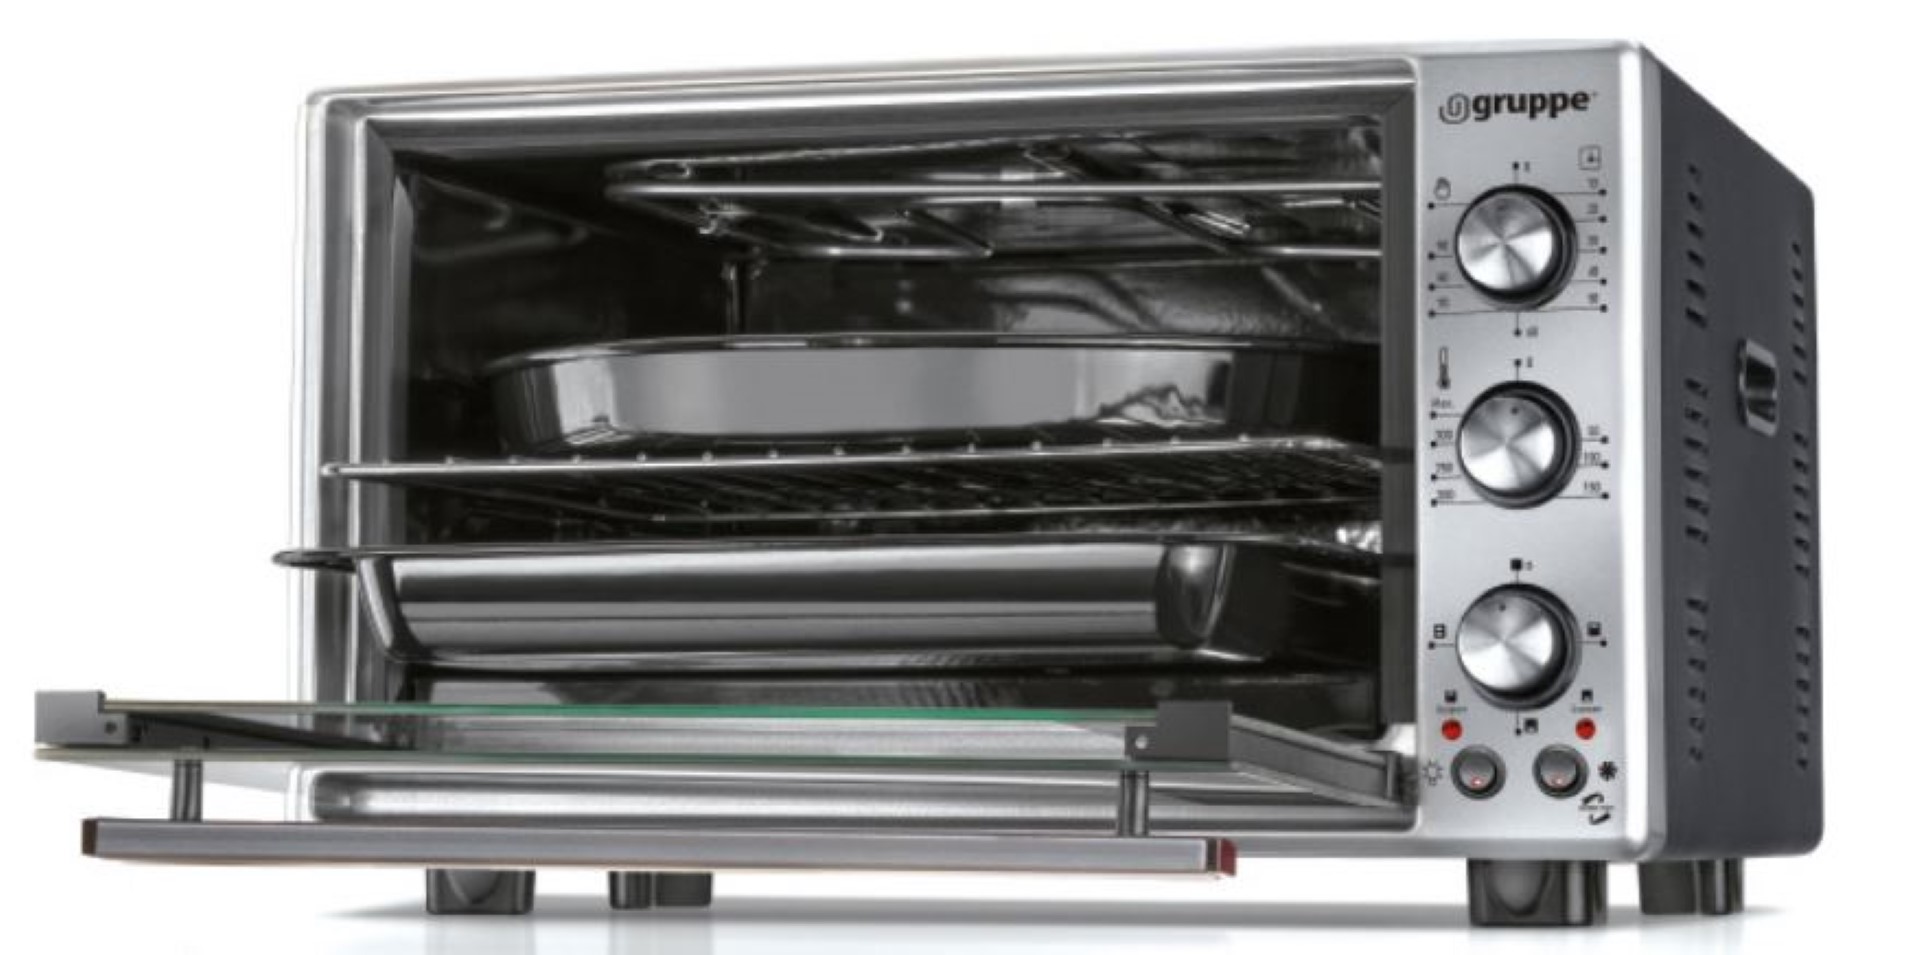 Gruppe AF 50 27 1 Electric Oven Open Box 2250 Watts (Copy)